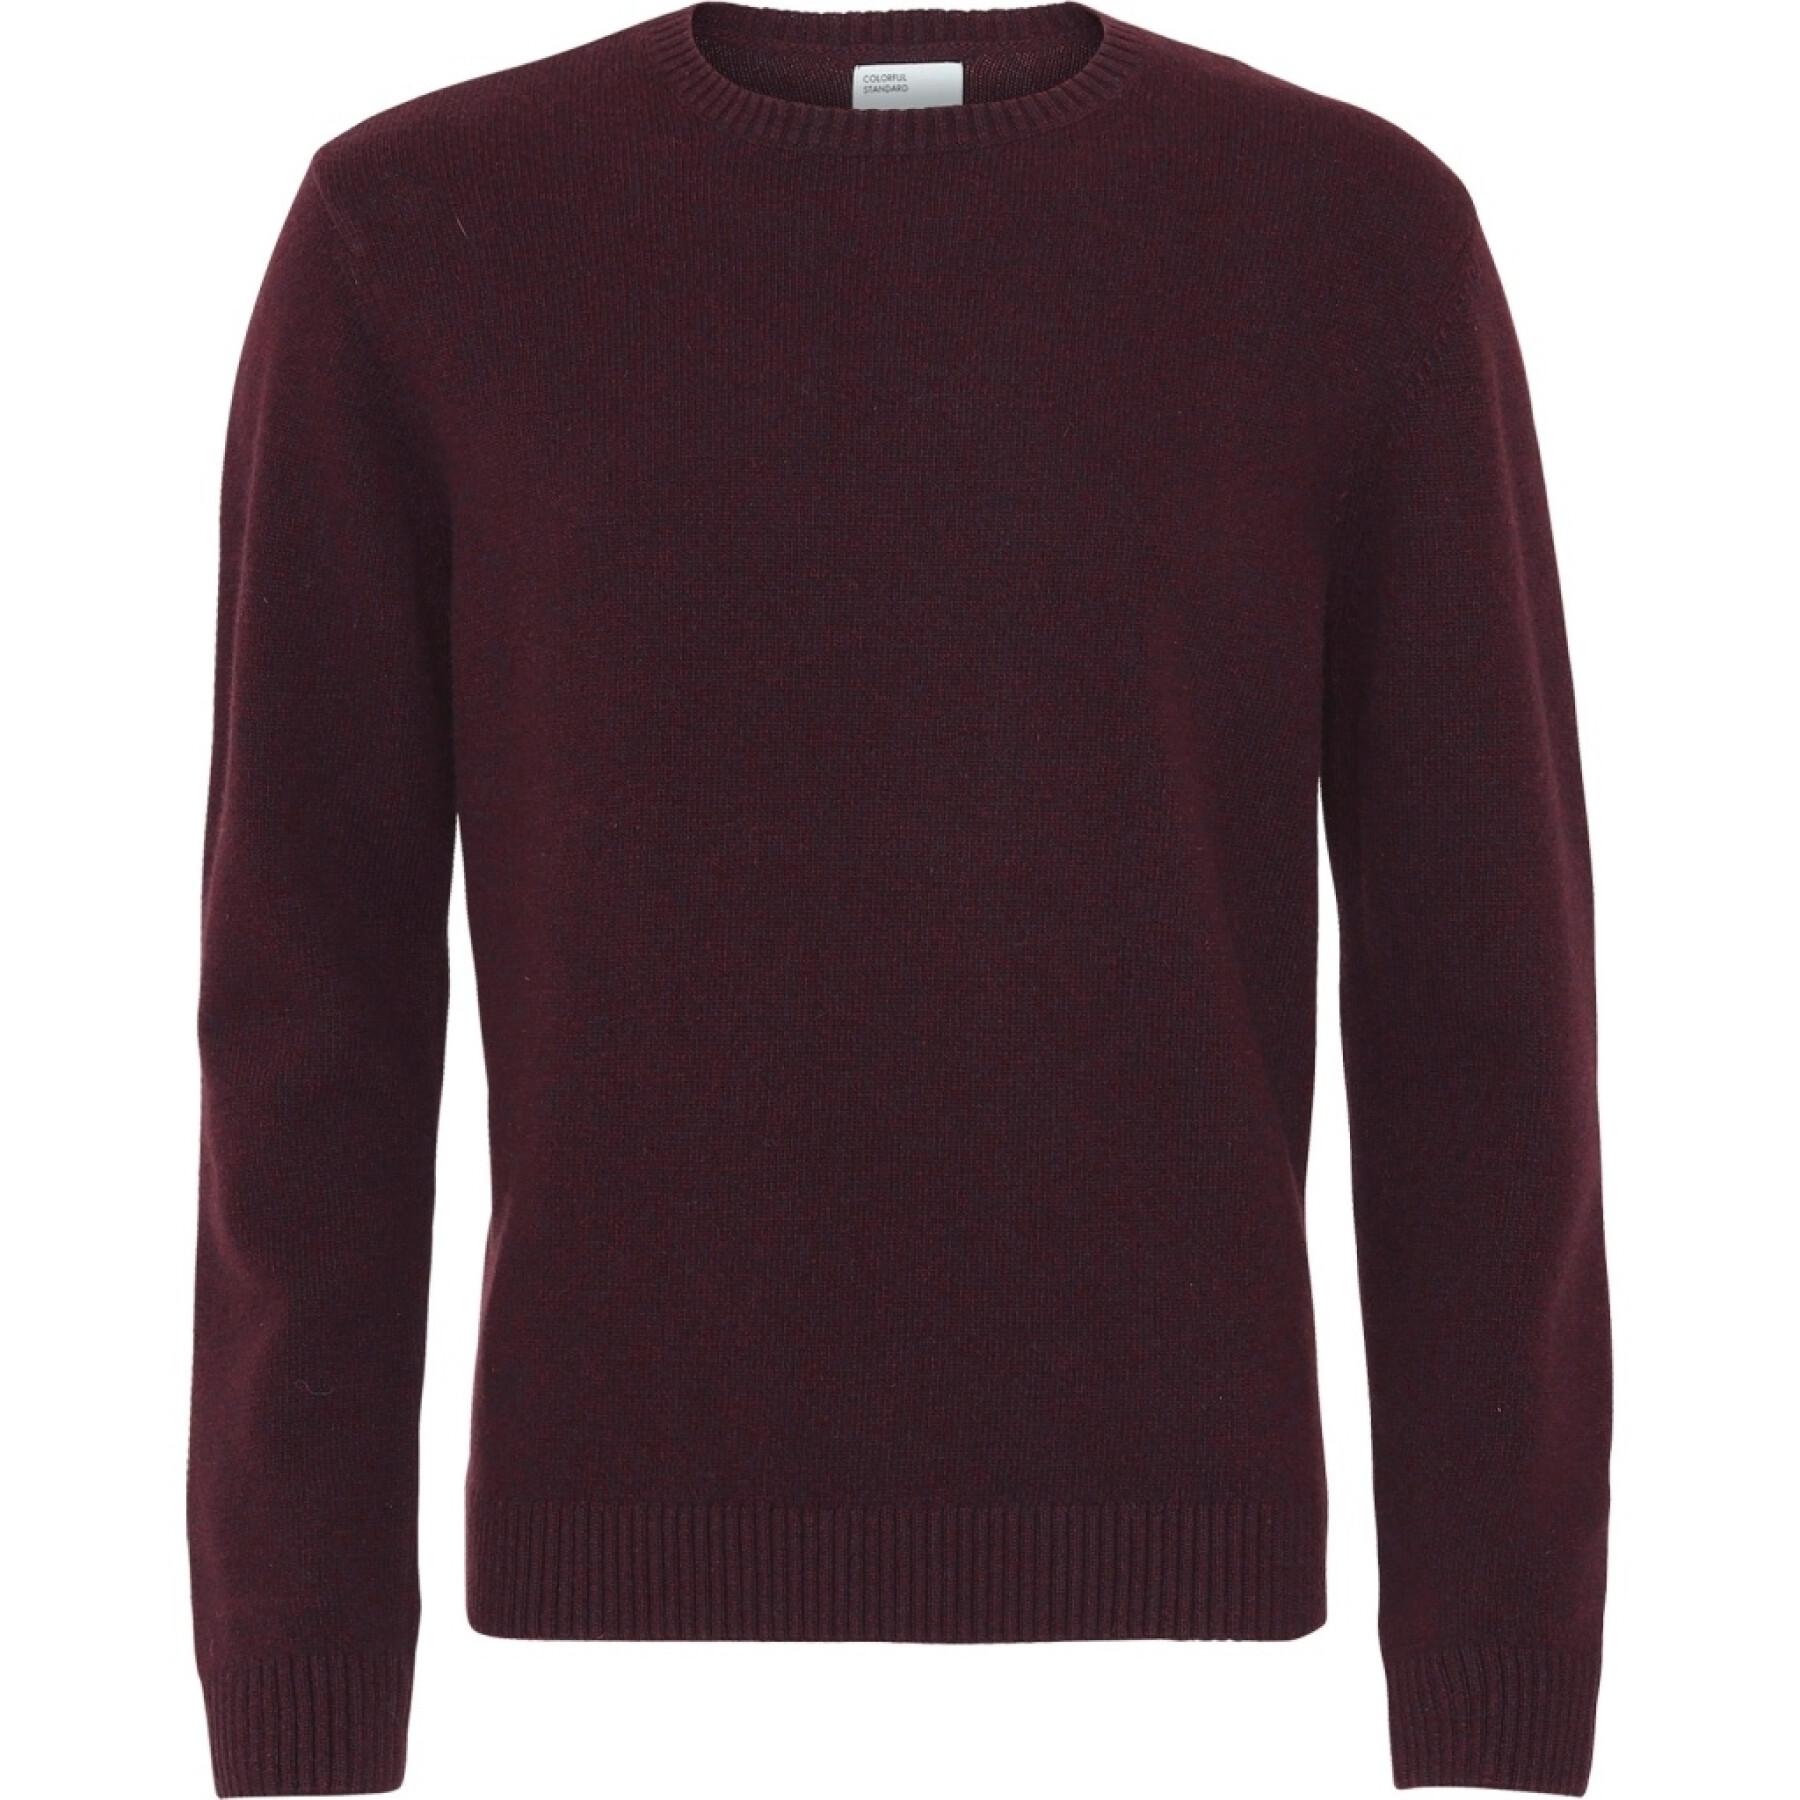 Wool round neck sweater Colorful Standard Classic Merino oxblood red